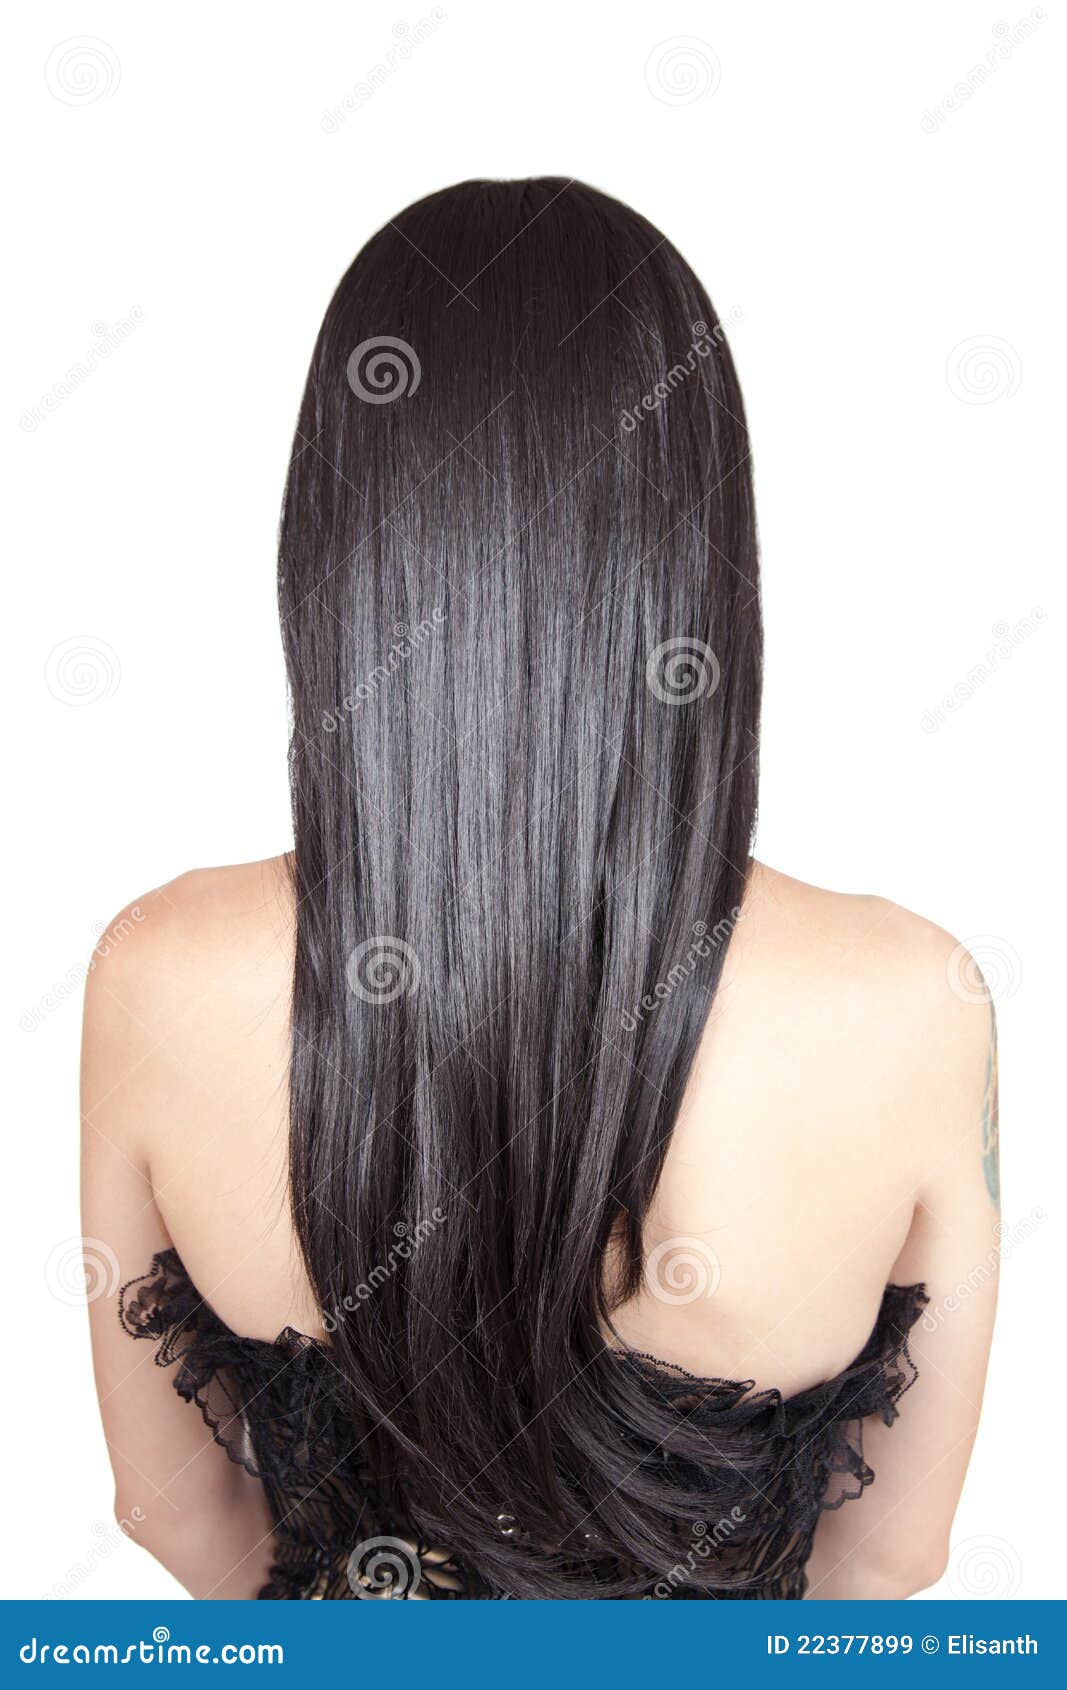 9,305 Silky Hair Style Images, Stock Photos, 3D objects, & Vectors |  Shutterstock